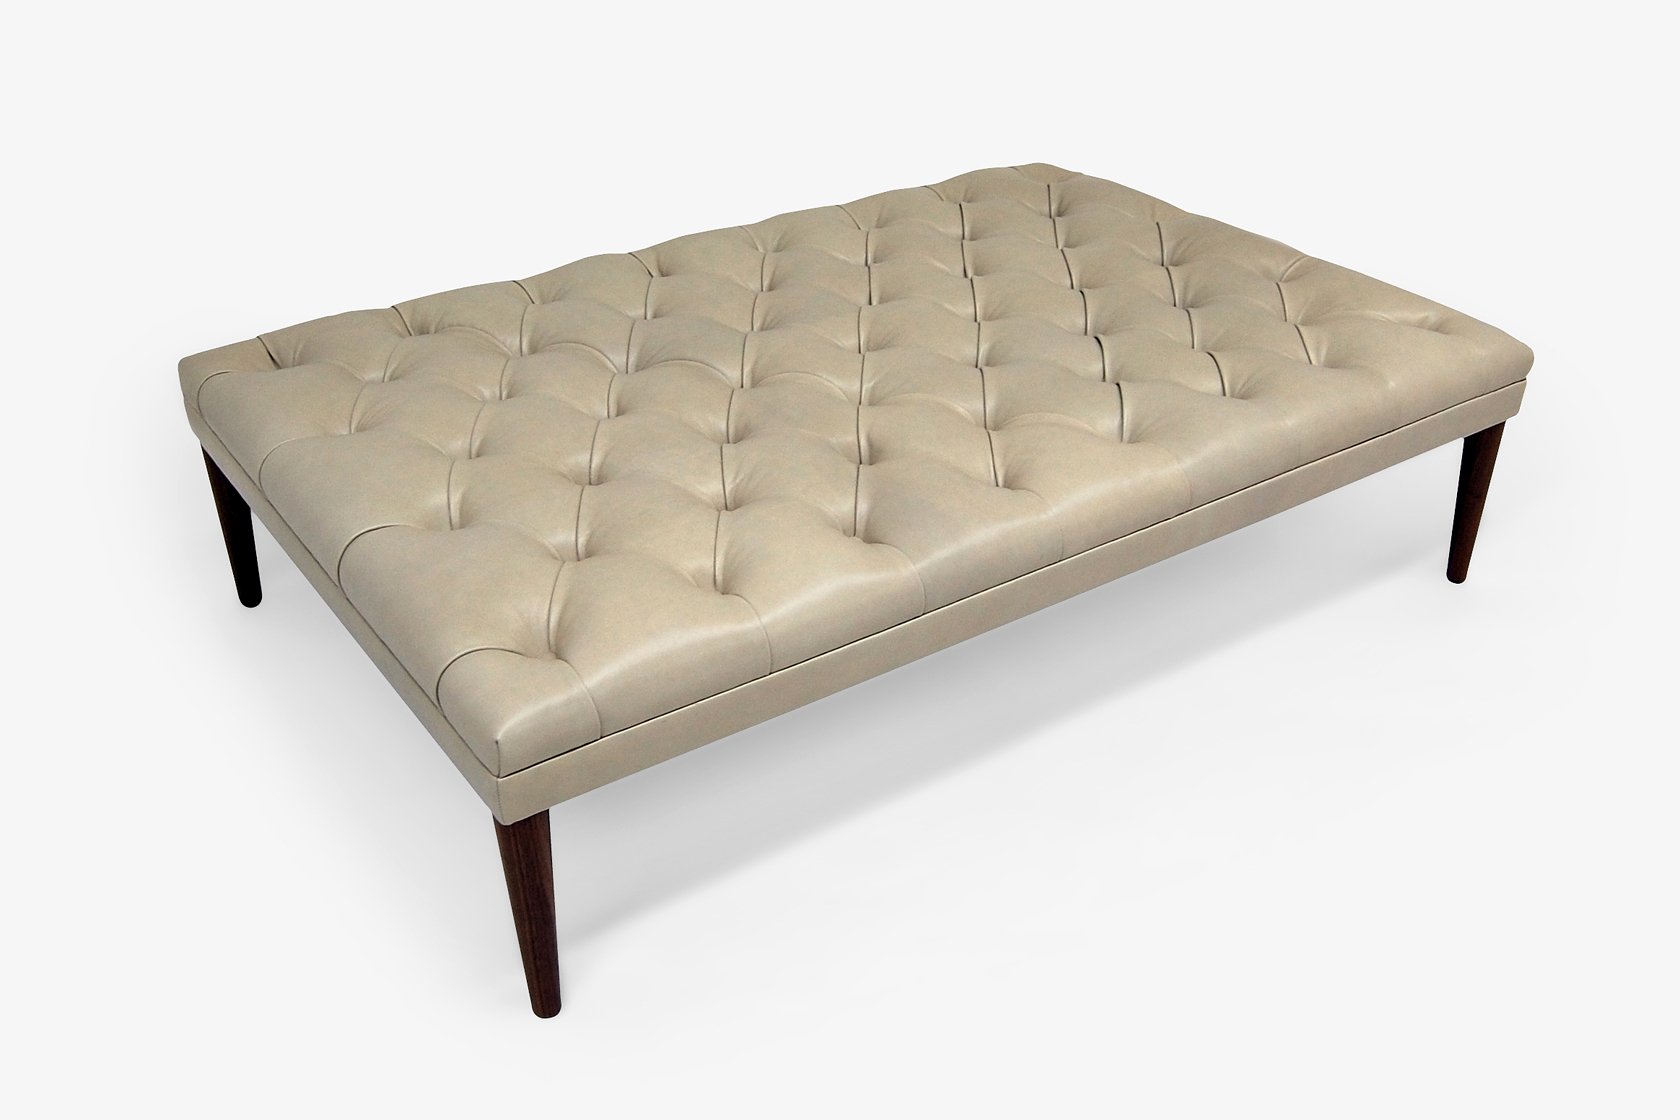 ROOM Amy Crain Trudie Tufted Ottoman maple custom customizable made to order | ROOM Furniture